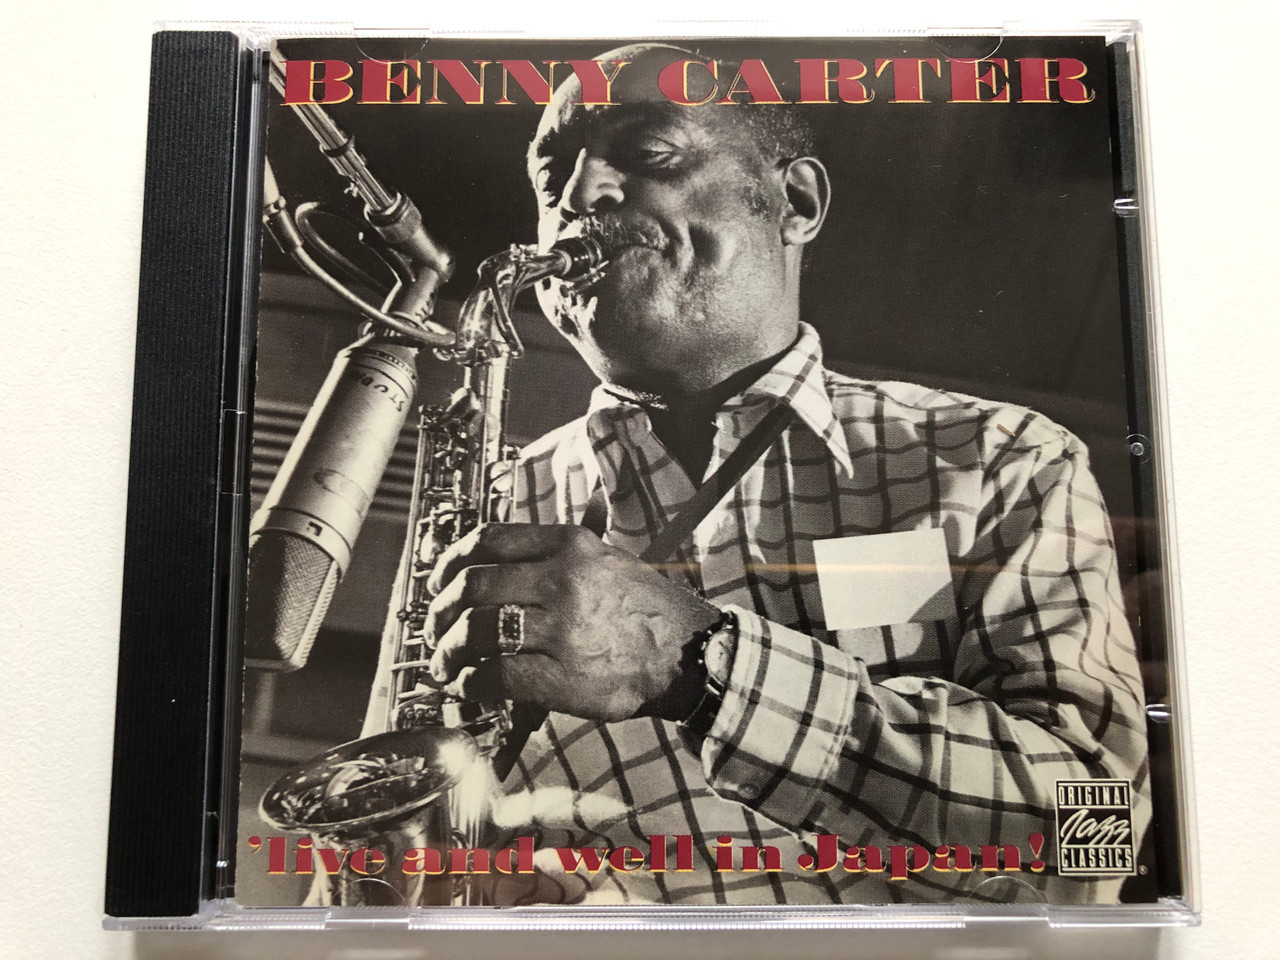 https://cdn11.bigcommerce.com/s-62bdpkt7pb/products/0/images/319876/Benny_Carter_Live_And_Well_In_Japan_Original_Jazz_Classics_Audio_CD_1992_Stereo_OJCCD-736-2_1__84903.1704362016.1280.1280.JPG?c=2